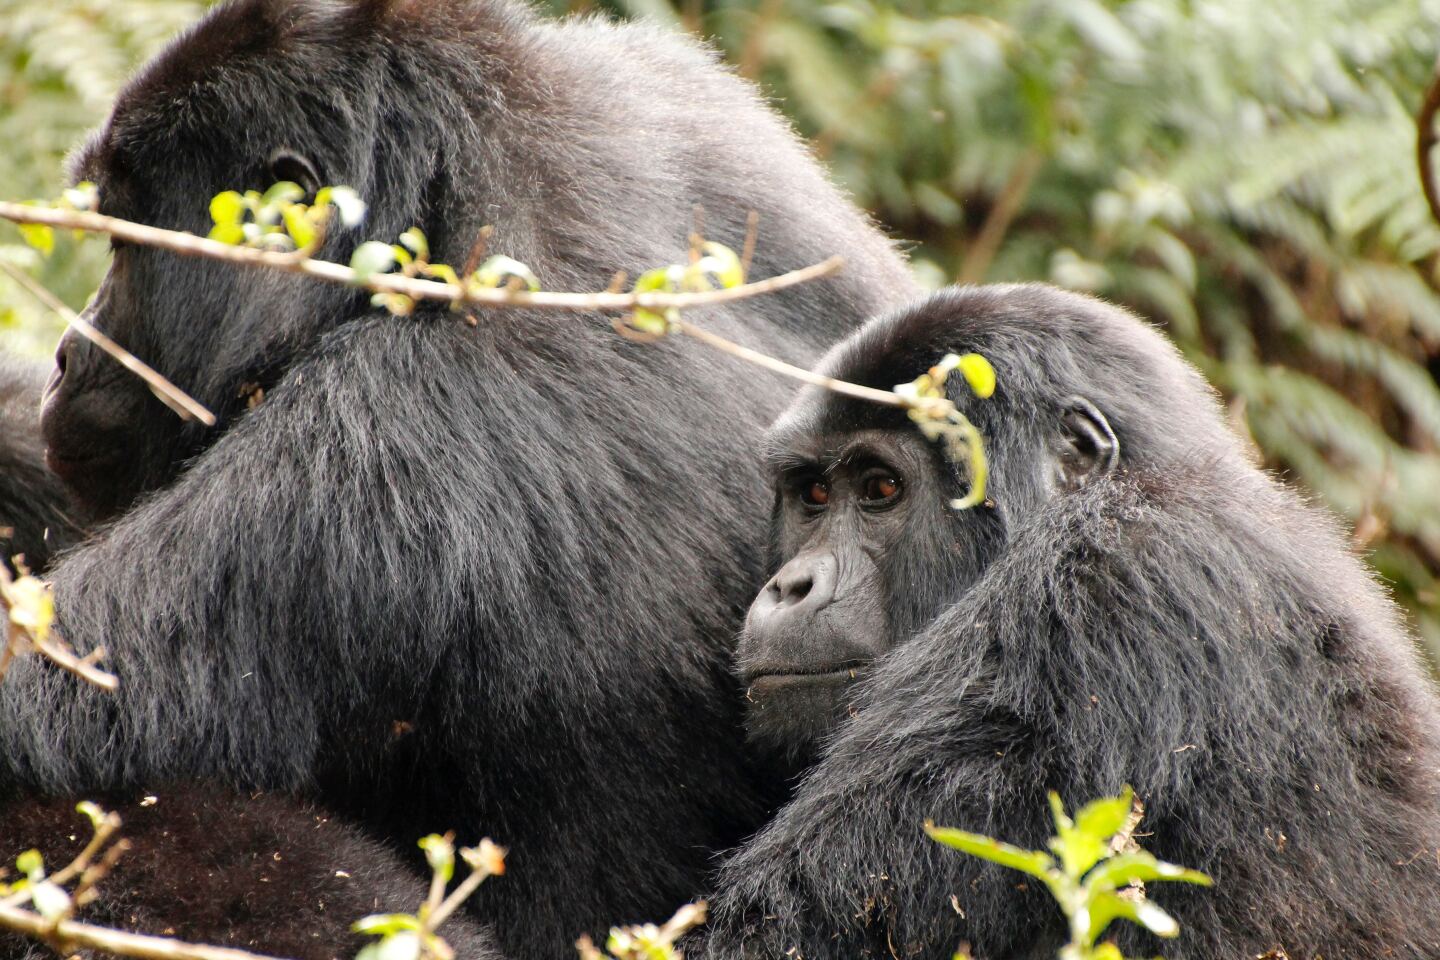 <h2>Bwindi Impenetrable Forest National Park</h2> <ul>   <li><b>Go for</b>: Silverback gorillas and a chance to learn about the Batwa community</li>   <li><b>Location</b>: <a class="Link" href="https://maps.app.goo.gl/JdhbzyaJZTsTnFsY6" rel="noopener">Google Maps</a></li>  </ul> <p>The final park on a circuit of western Uganda is <a class="Link" href="https://www.bwindiforestnationalpark.com/" rel="noopener">Bwindi Impenetrable Forest National Park</a>, which is a 3- to 4-hour drive from Queen Elizabeth National Park.</p> <p>This park is home to about half of the world’s 750 remaining <a class="Link" href="https://www.afar.com/magazine/gorilla-trekking-rwanda-uganda" rel="noopener">silverback mountain gorillas</a>, earning it a UNESCO World Heritage Site designation in 1994. The ancient forest dates back 25,000 years and is densely vegetated with orchids, tree ferns, red stinkwoods, and tangled vines.</p> <p>Bwindi offers visitors the opportunity to meet people from the <a class="Link" href="https://batwaexperience.org/tours/" rel="noopener">Batwa community</a>, who are the original inhabitants of the rainforest. Take a guided walk with a Batwa community member, who can teach you about ancient hunting traditions, medicinal plants, and traditional songs.</p> <h2>Tour Operators in Uganda</h2> <p>Uganda’s parks are best visited with a tour operator, who can organize a trip to either one or several of these parks. Here are our top choices, as well as a guiding company for trekkers interested in the Rwenzori Mountains:</p> <h3>Abercrombie and Kent</h3> <p><a class="Link" href="https://www.abercrombiekent.com/travel-destinations/africa-safari/uganda" rel="noopener">Abercrombie and Kent</a> offers small-group and tailor-made tours that visit most parks along this circuit. With them, travelers also have the opportunity to visit one of the programs supported by A&K Philanthropy, such as the <a class="Link" href="https://akphilanthropy.org/bwindi-bikes/" rel="noopener">Bwindi Women’s Bicycle Enterprise</a> or the <a class="Link" href="https://akphilanthropy.org/bwindi-community-hospital-nursing-school-2/" rel="noopener">Bwindi Community Hospital and Nursing School</a>. </p> <h3>The Uganda Safari Company</h3> <p><a class="Link" href="https://www.safariuganda.com/" rel="noopener">The Uganda Safari Company</a> has been offering high-end safari circuits across Uganda since 1993. Guests may have the opportunity to visit smallholder farmers, traditional healers, and rangers who work on anti-poaching measures.</p> <h3>Wild Frontiers</h3> <p><a class="Link" href="http://wildfrontiers.co.ug" rel="noopener">Wild Frontiers </a>has more than 25 years of experience running tours across Uganda. Most staff members are Ugandan, and there are opportunities for travelers to take part in a diverse set of community projects, from youth wildlife clubs to sewing programs for women.</p> <h3>Rwenzori Trekking</h3> <p><a class="Link" href="https://rwenzoritrekking.com/" rel="noopener">Rwenzori Trekking</a> offers guided tours around the Rwenzori Mountains, including weeklong trips to summit Mount Margherita. Please note that summitting Mount Margherita, the continent’s third-highest peak, has been classified as a technical climb and requires specialized equipment such as crampons and ice axes.</p> <p><i>This article originally appeared online in 2011; it was most recently updated on January 12, 2024, to include current information.</i></p> <p><b>>> Next: </b><a class="Link" href="https://www.afar.com/magazine/path-of-dreams-the-trip-of-a-lifetime-in-uganda" rel="noopener"><b>In Uganda, One Refugee Finds New Joy in Adventure</b></a></p>